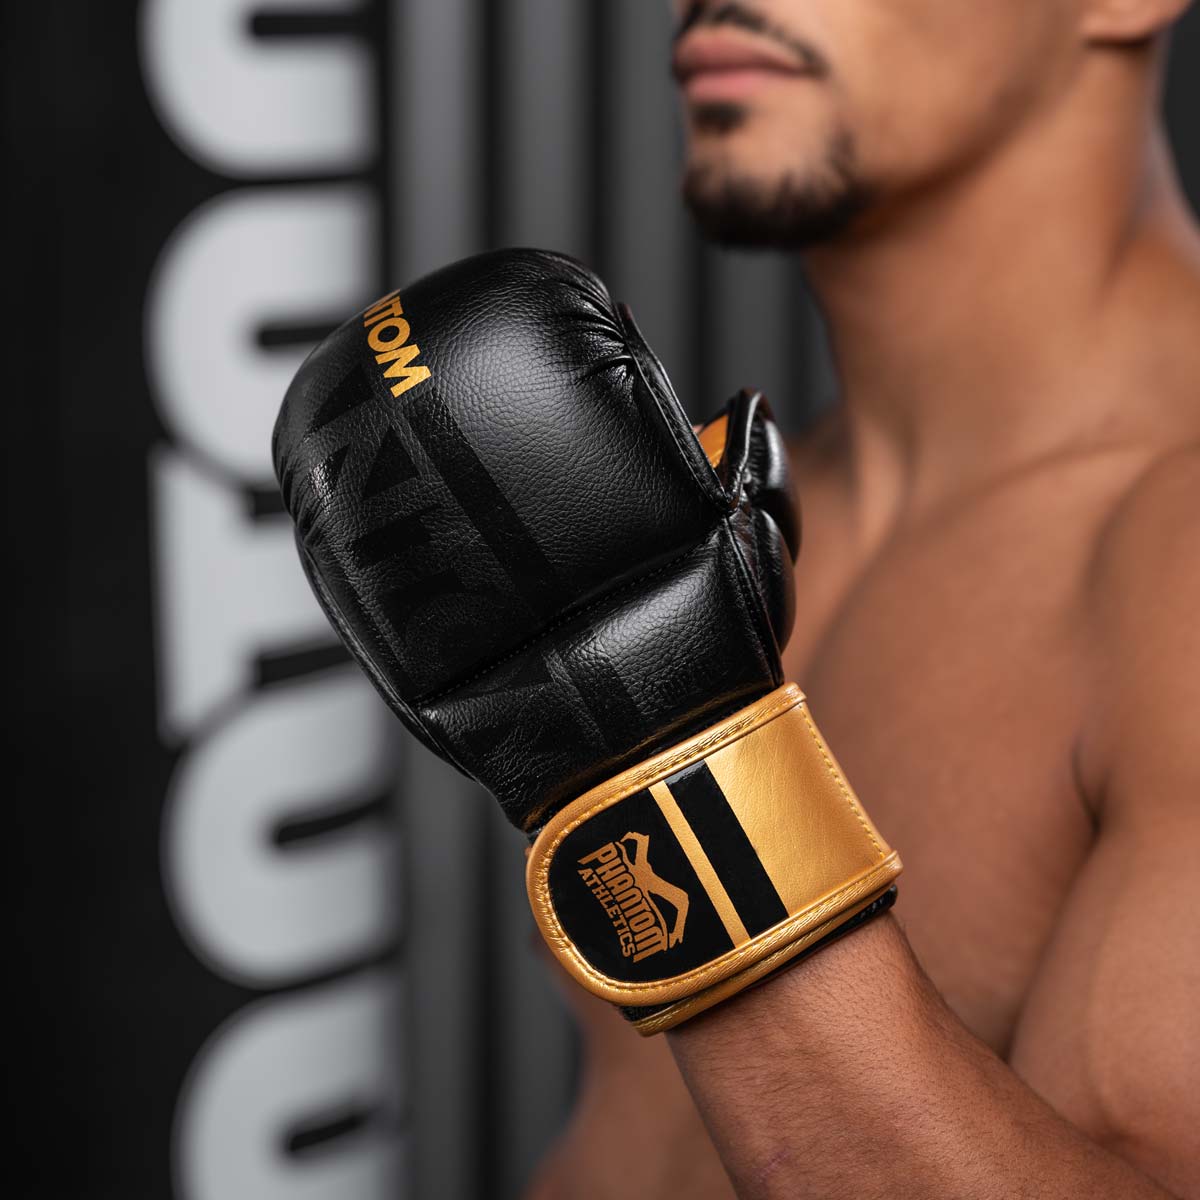 MMA Sparring Handschuhe APEX - Gold